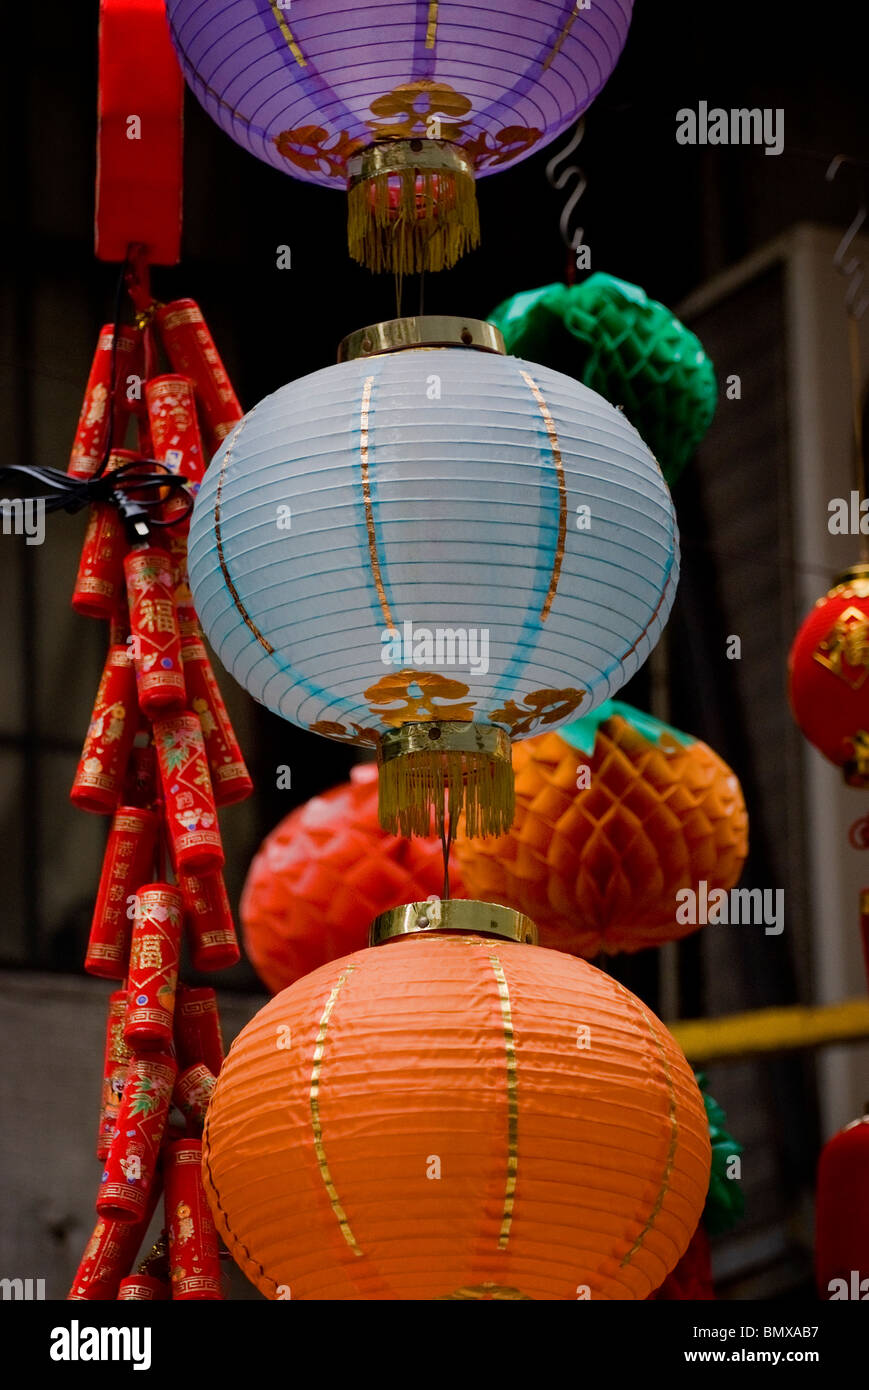 On the day before Chinese New Year in Hong Kong, China, the markets in the central district display Chinese lanterns for sale. Stock Photo